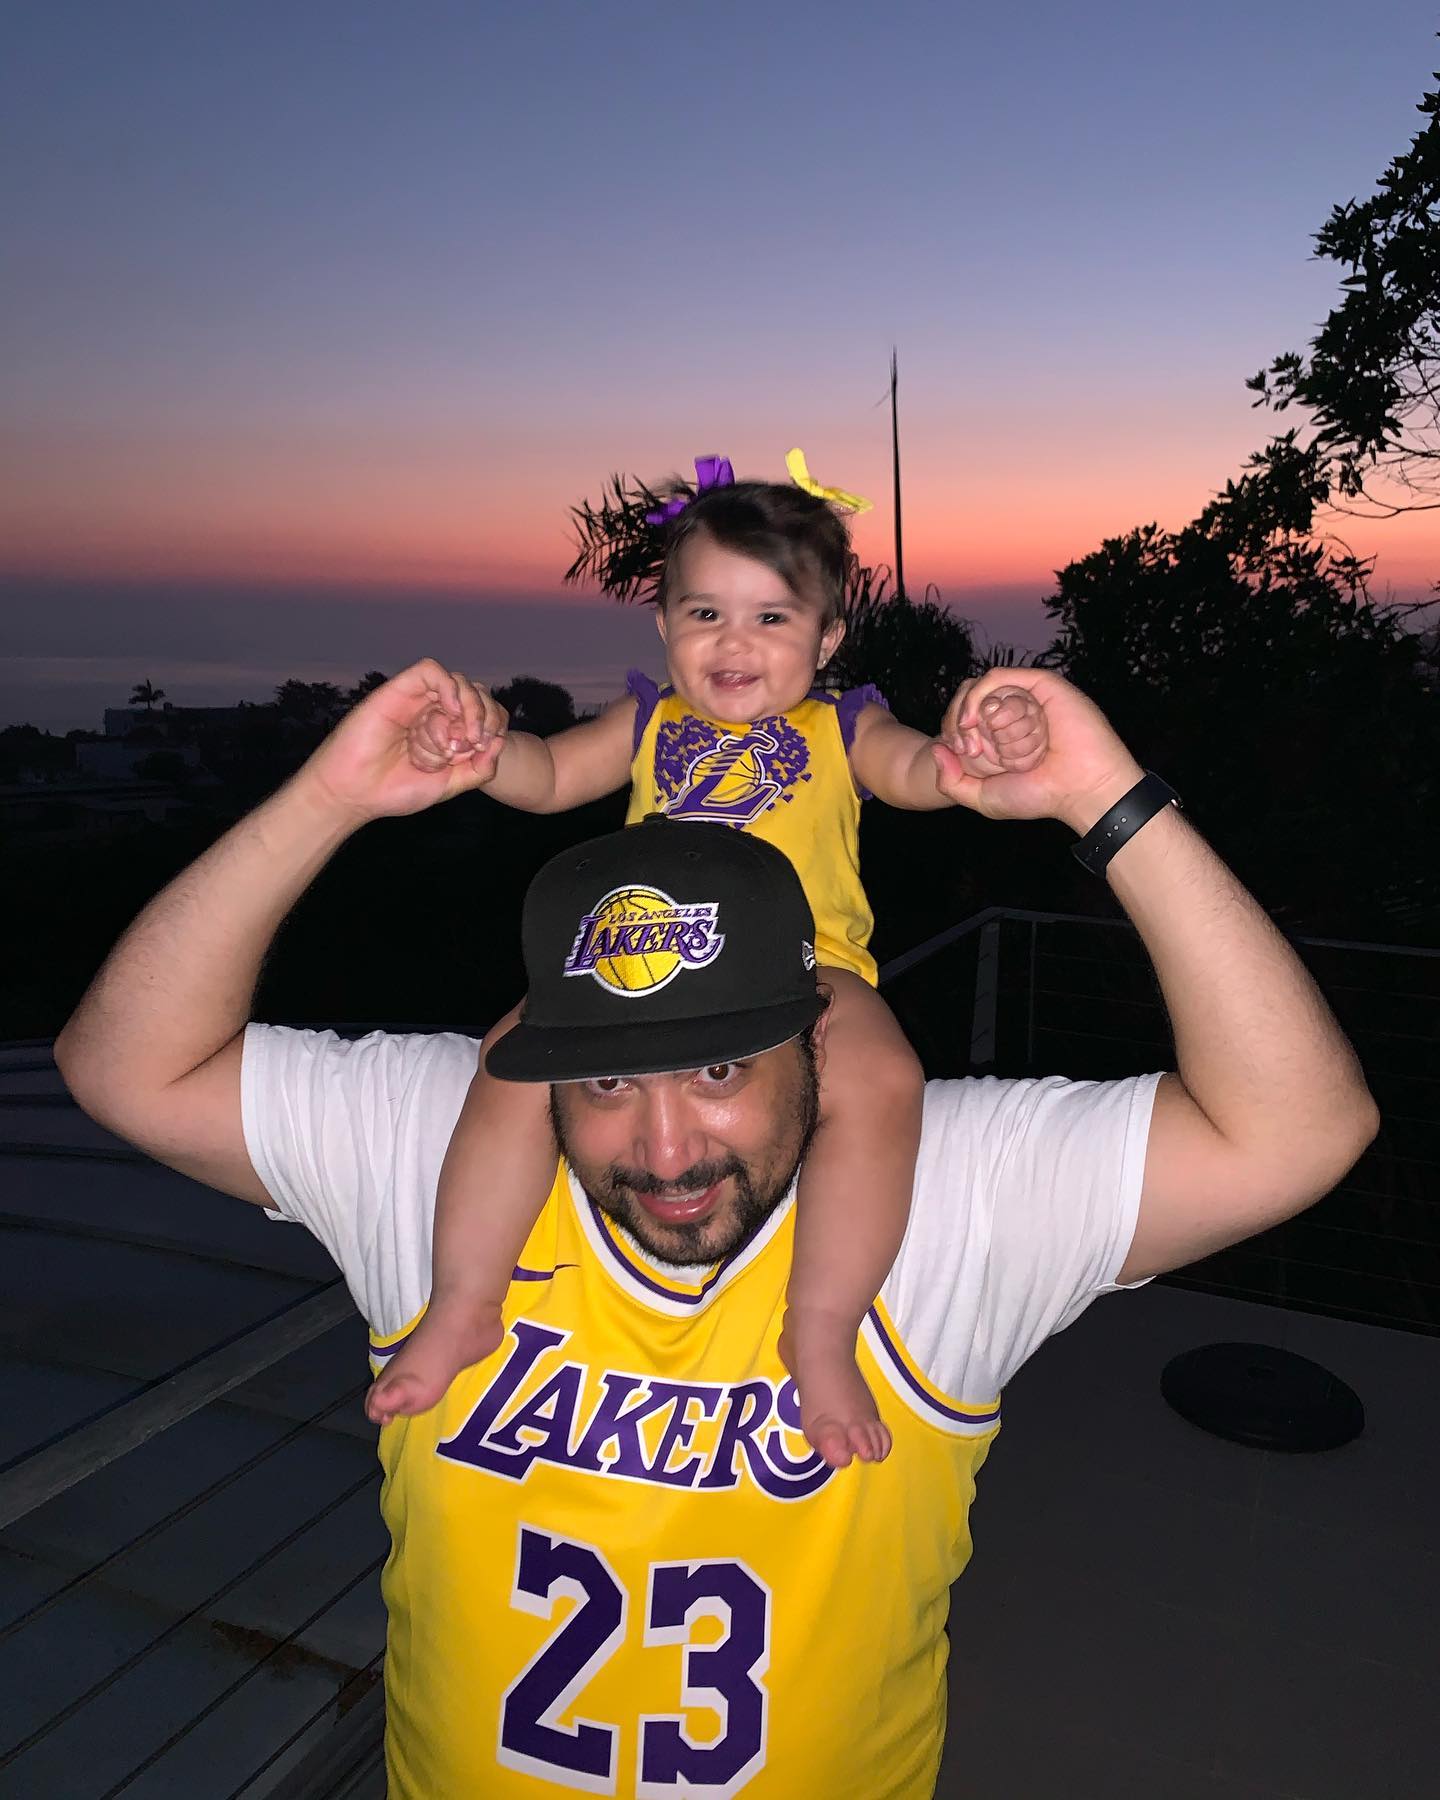 Mila says Lakers in 5! Sunsets+Mila+Lakers =️ 
.⁣
.⁣
.⁣
.⁣
.⁣